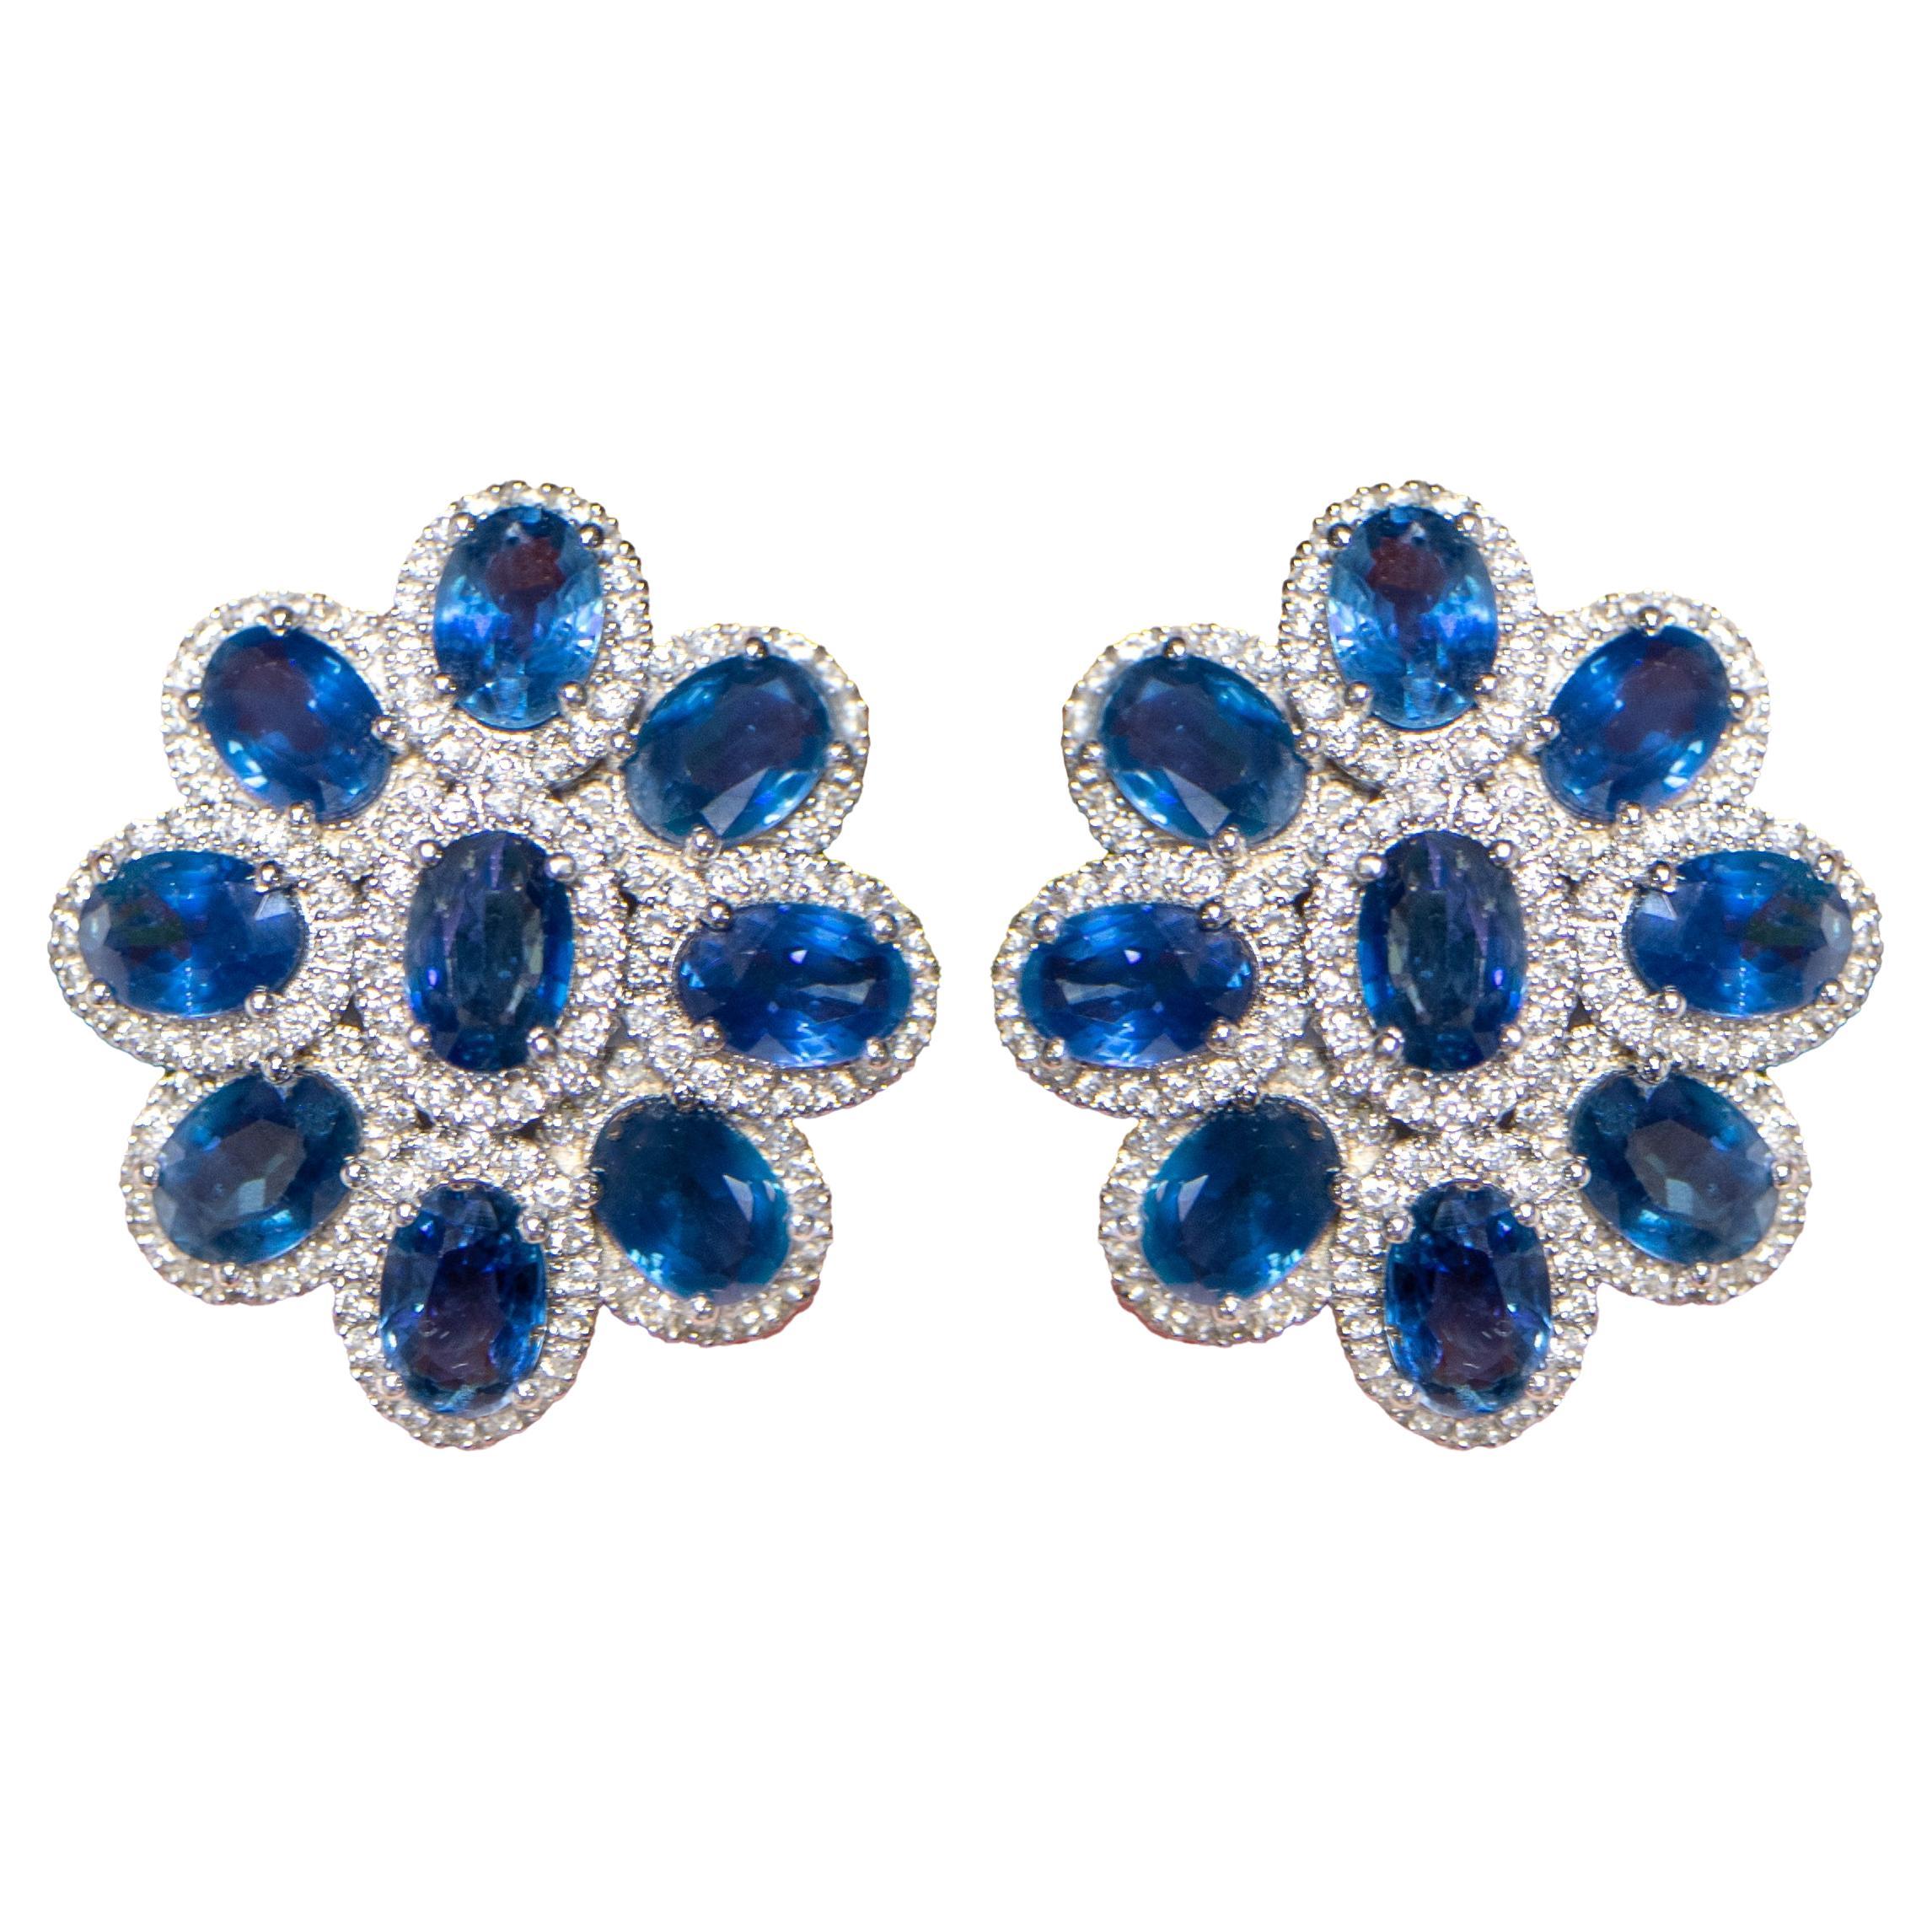 Blue Sapphire Flower Earrings With Diamonds 11 Carats 18K Gold For Sale